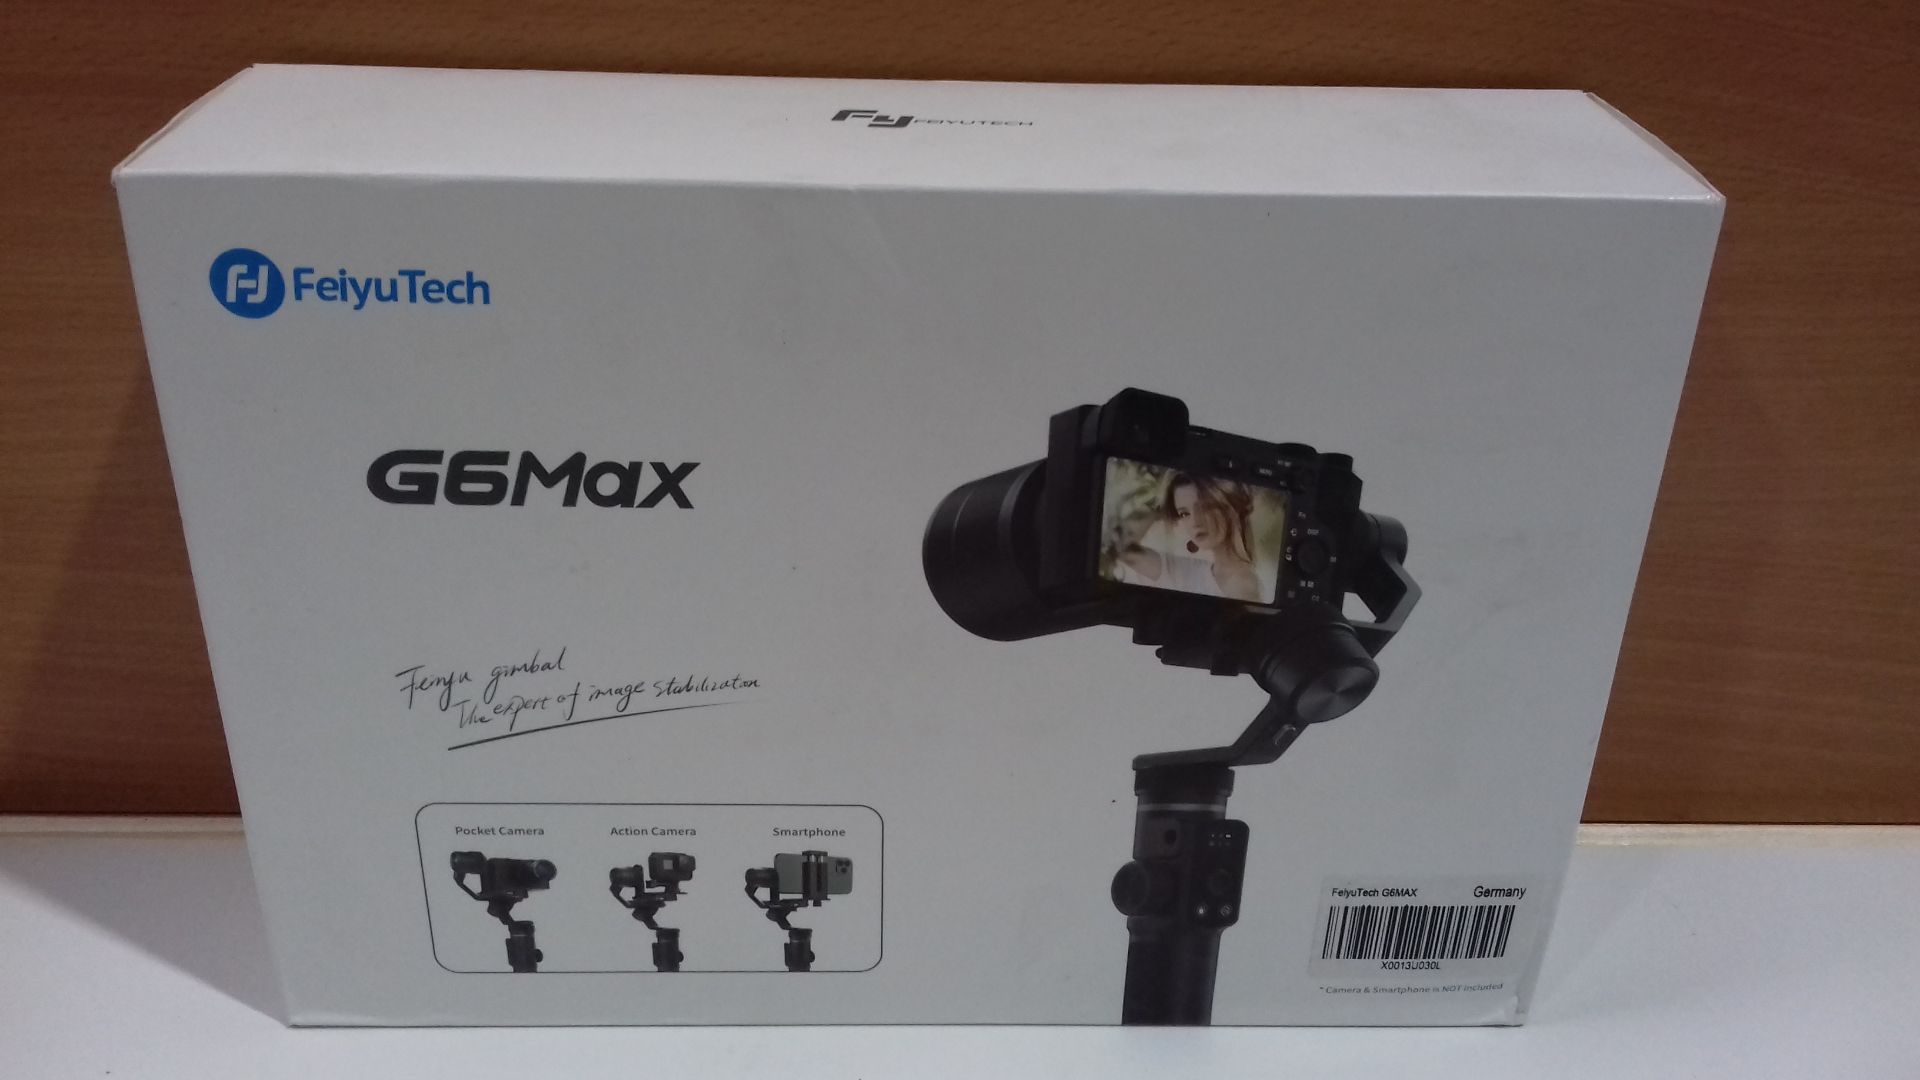 RRP £99.00 FeiyuTech G6MAX Gimbal Stabilizer For Camera - Image 2 of 2